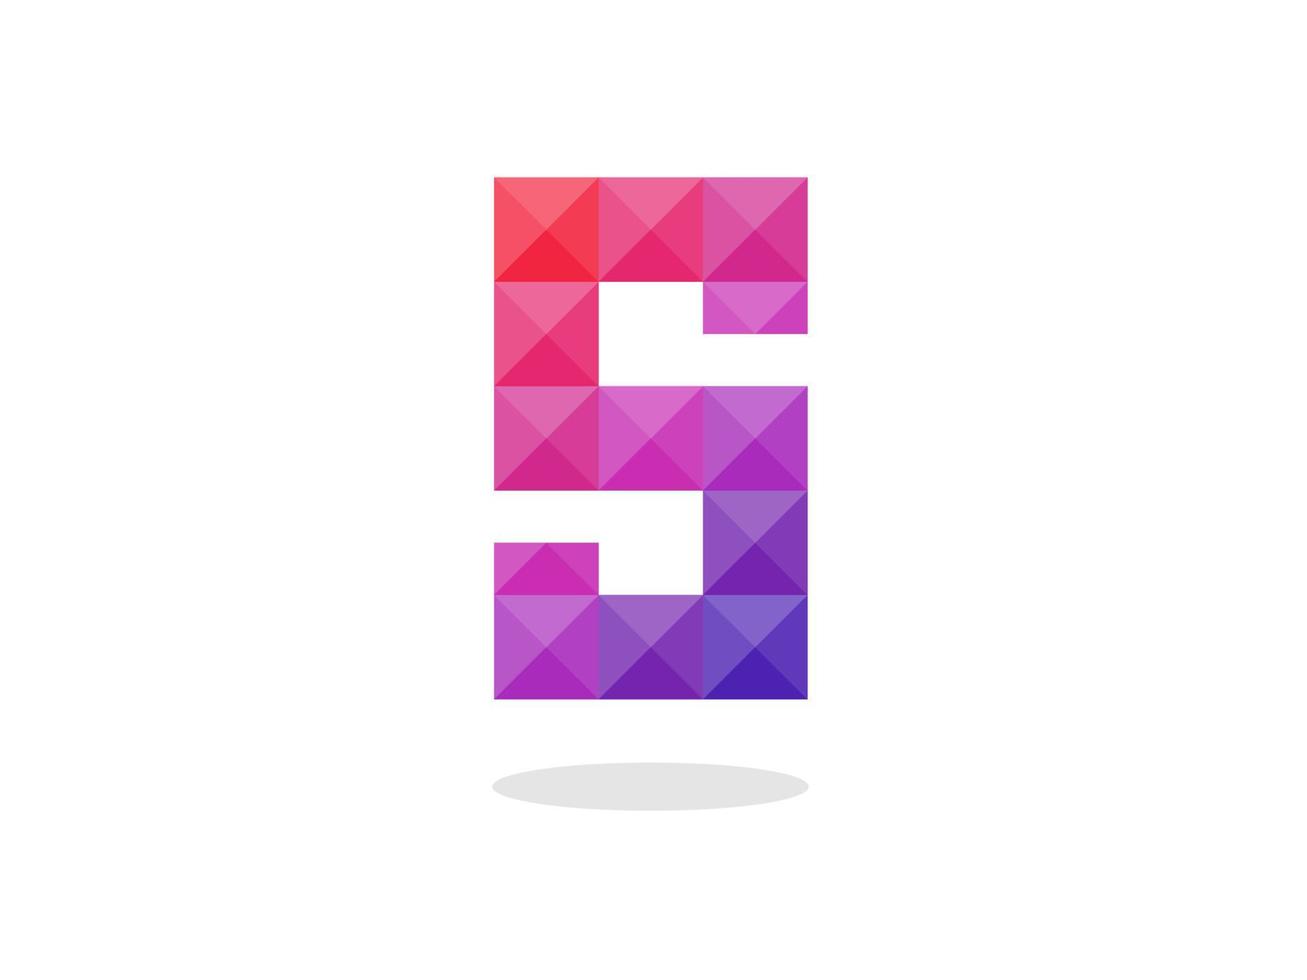 Geometric Letter S logo with perfect combination of red-blue colors. vector